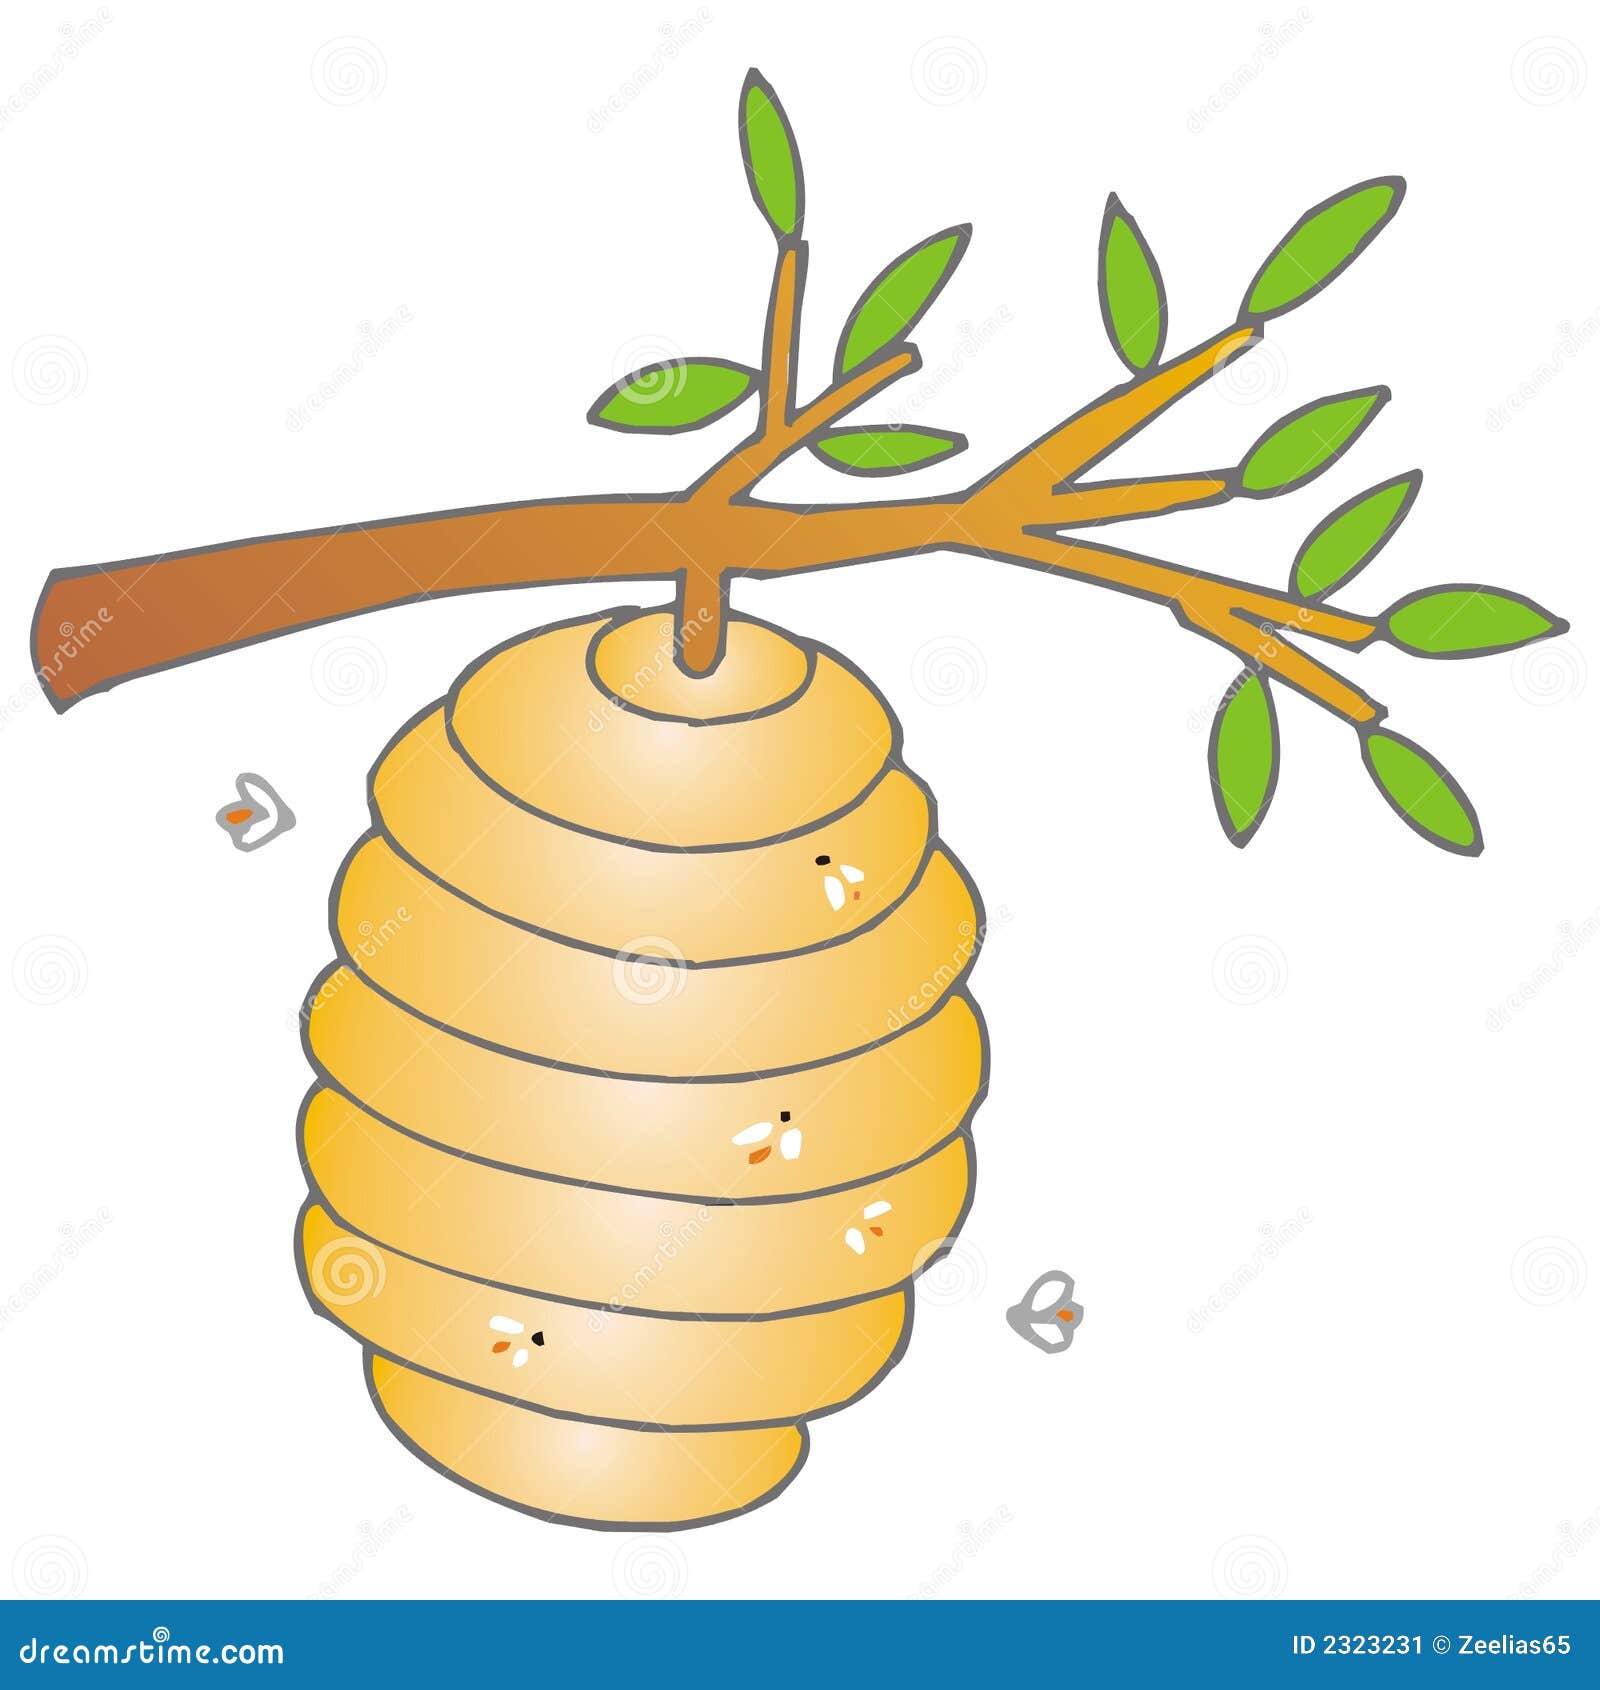 clipart images of bee hives - photo #42